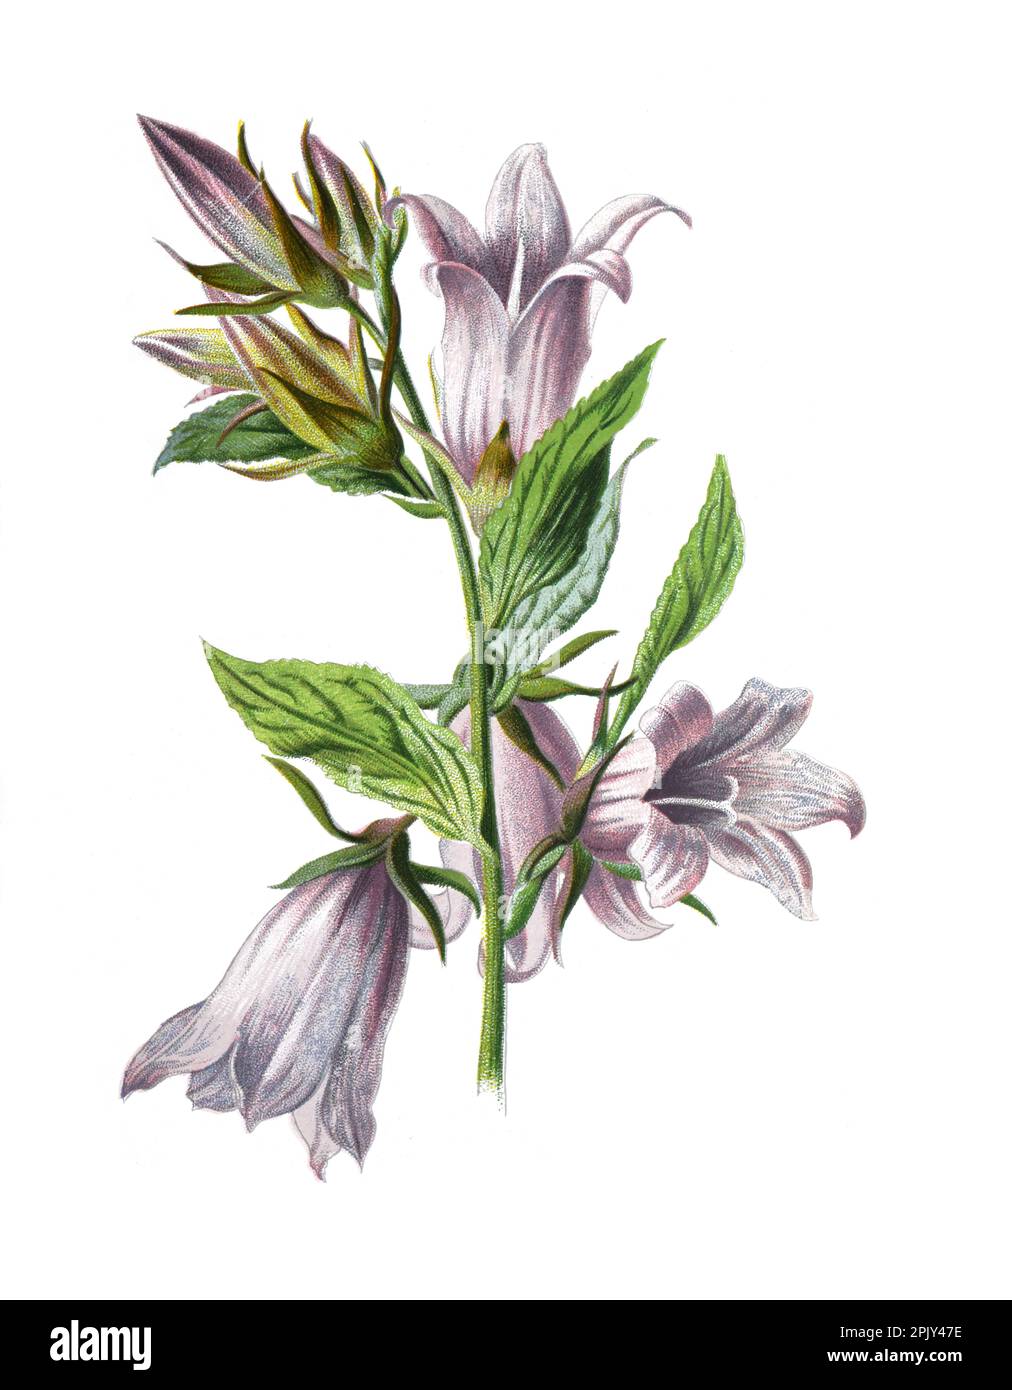 Nettle leaved bell flower or Campanula trachelium flower. Antique hand drawn field flowers illustration. Vintage and antique wild field flowers. Stock Photo